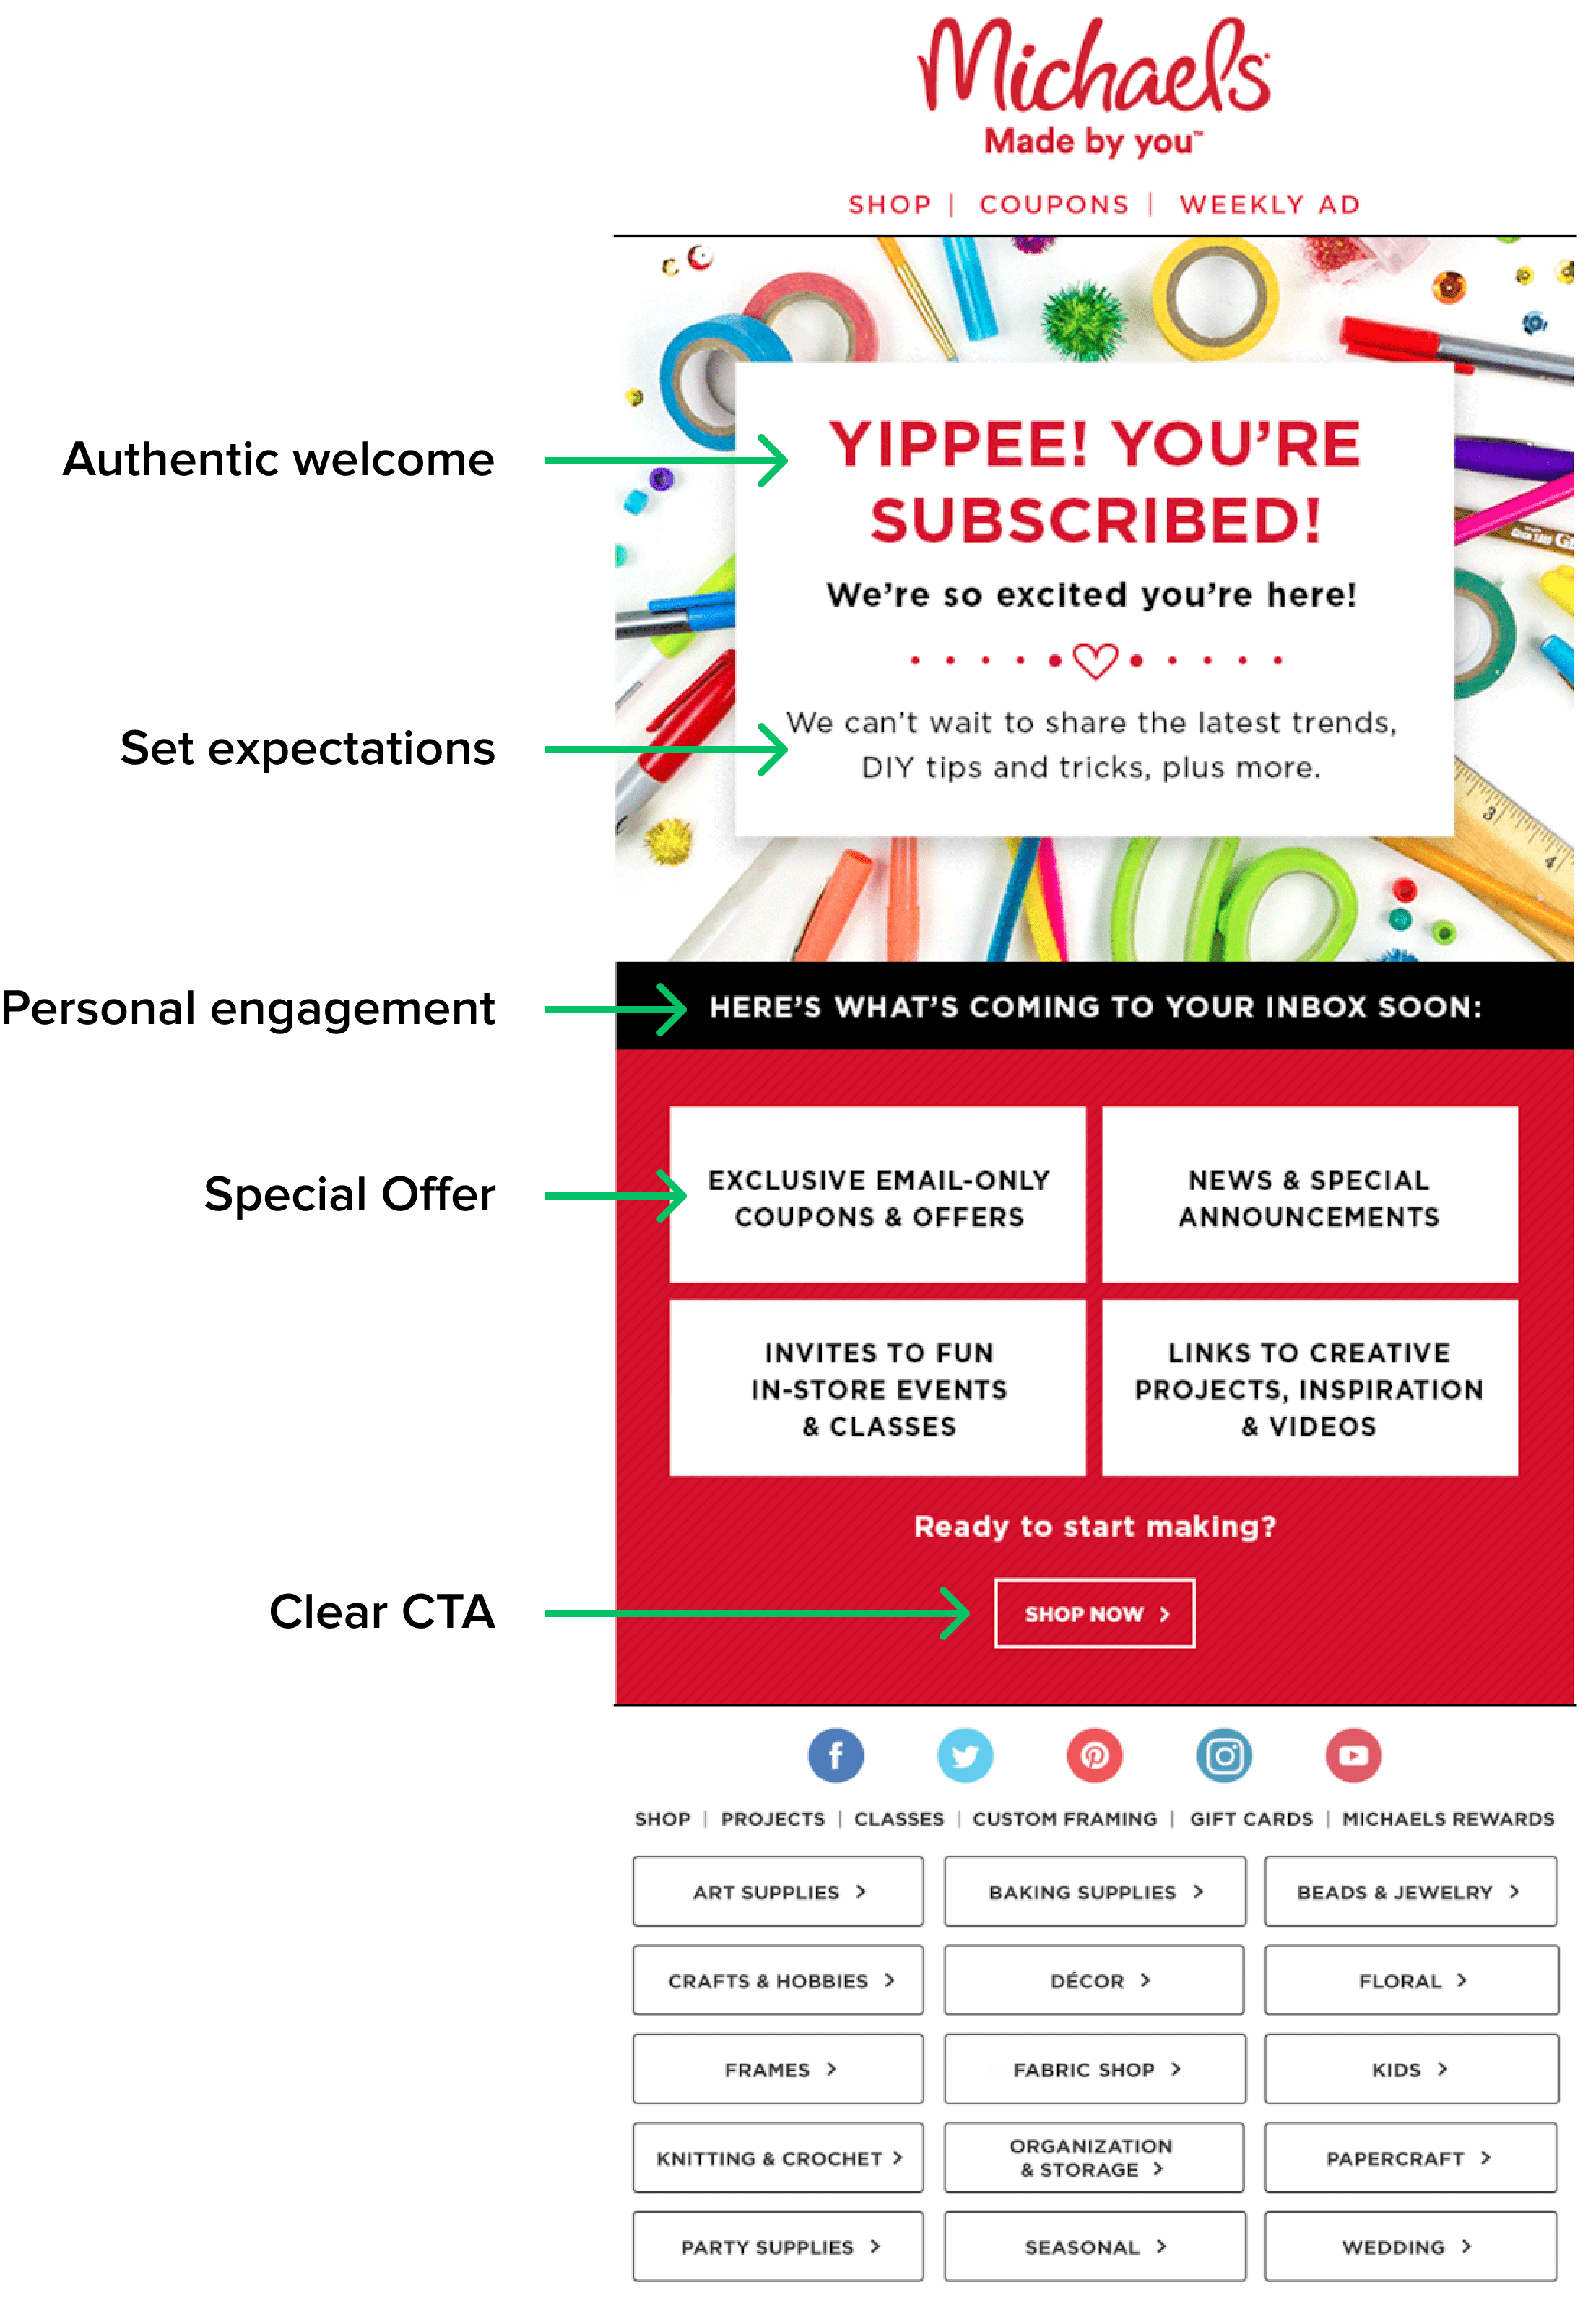 automated welcome email example from Michaels